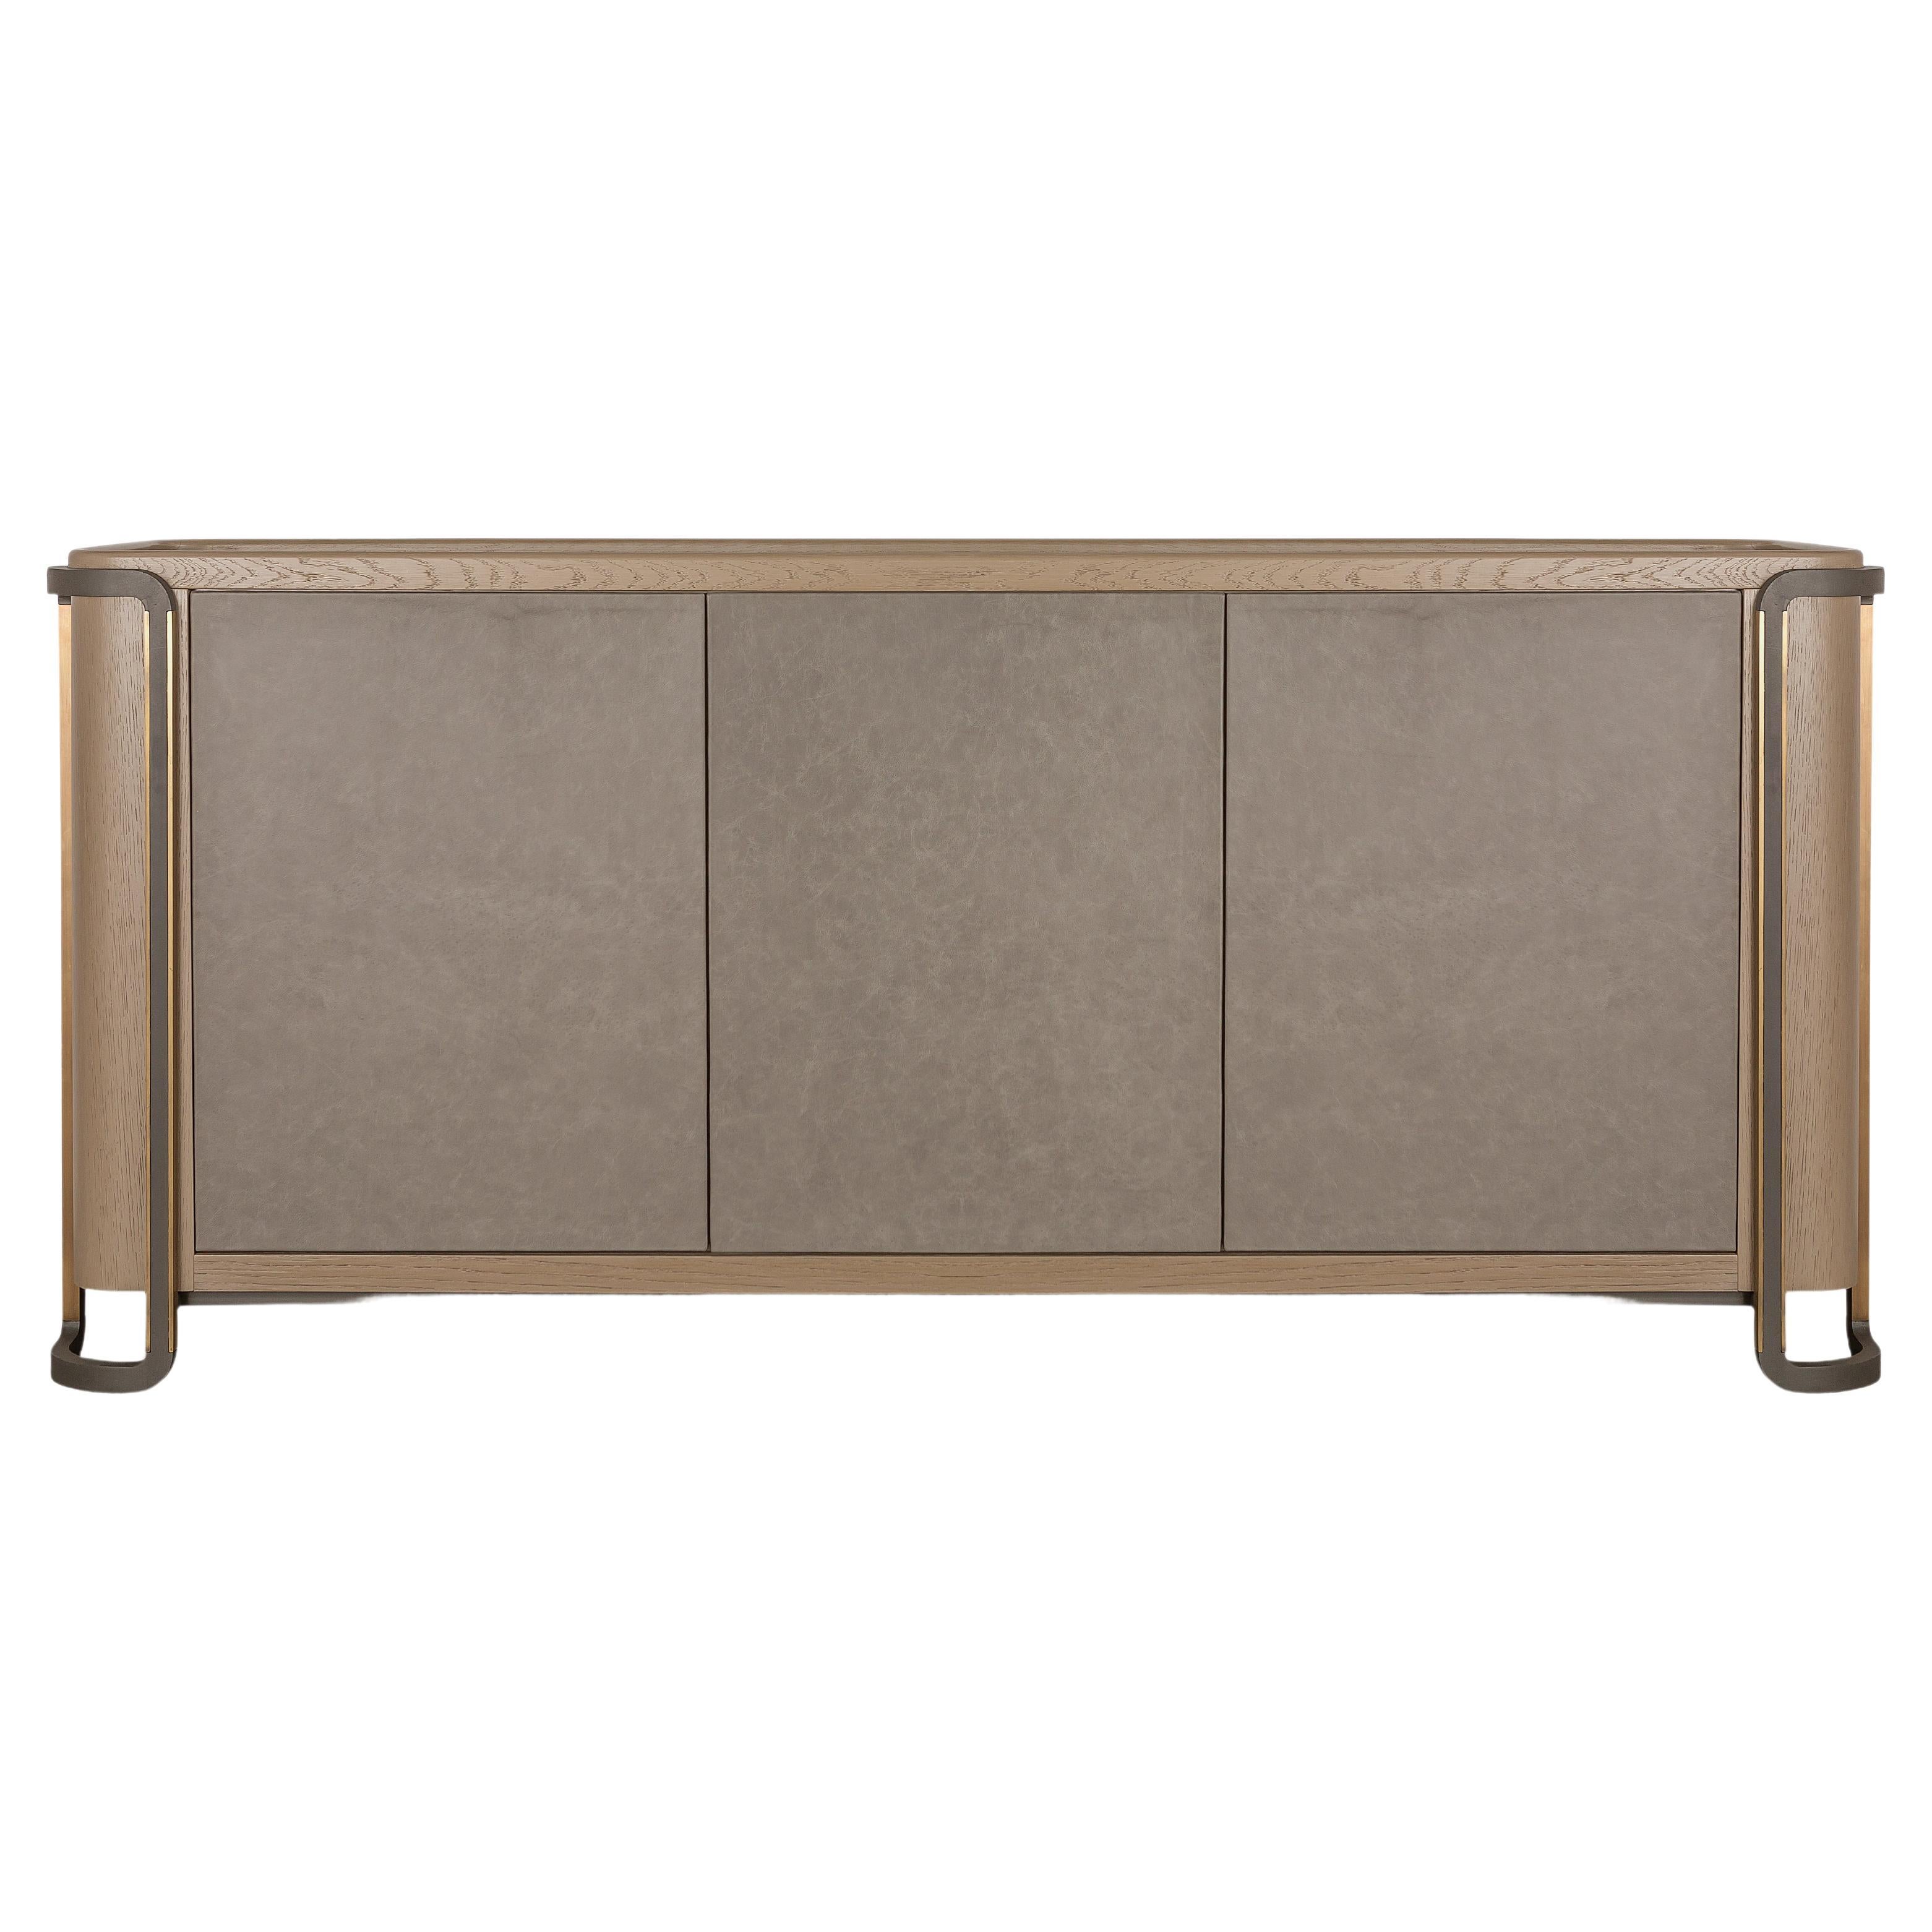 Modern Credenza, Oak and Leather Body, Painted Glass Top, Antique Plated Metal Legs For Sale